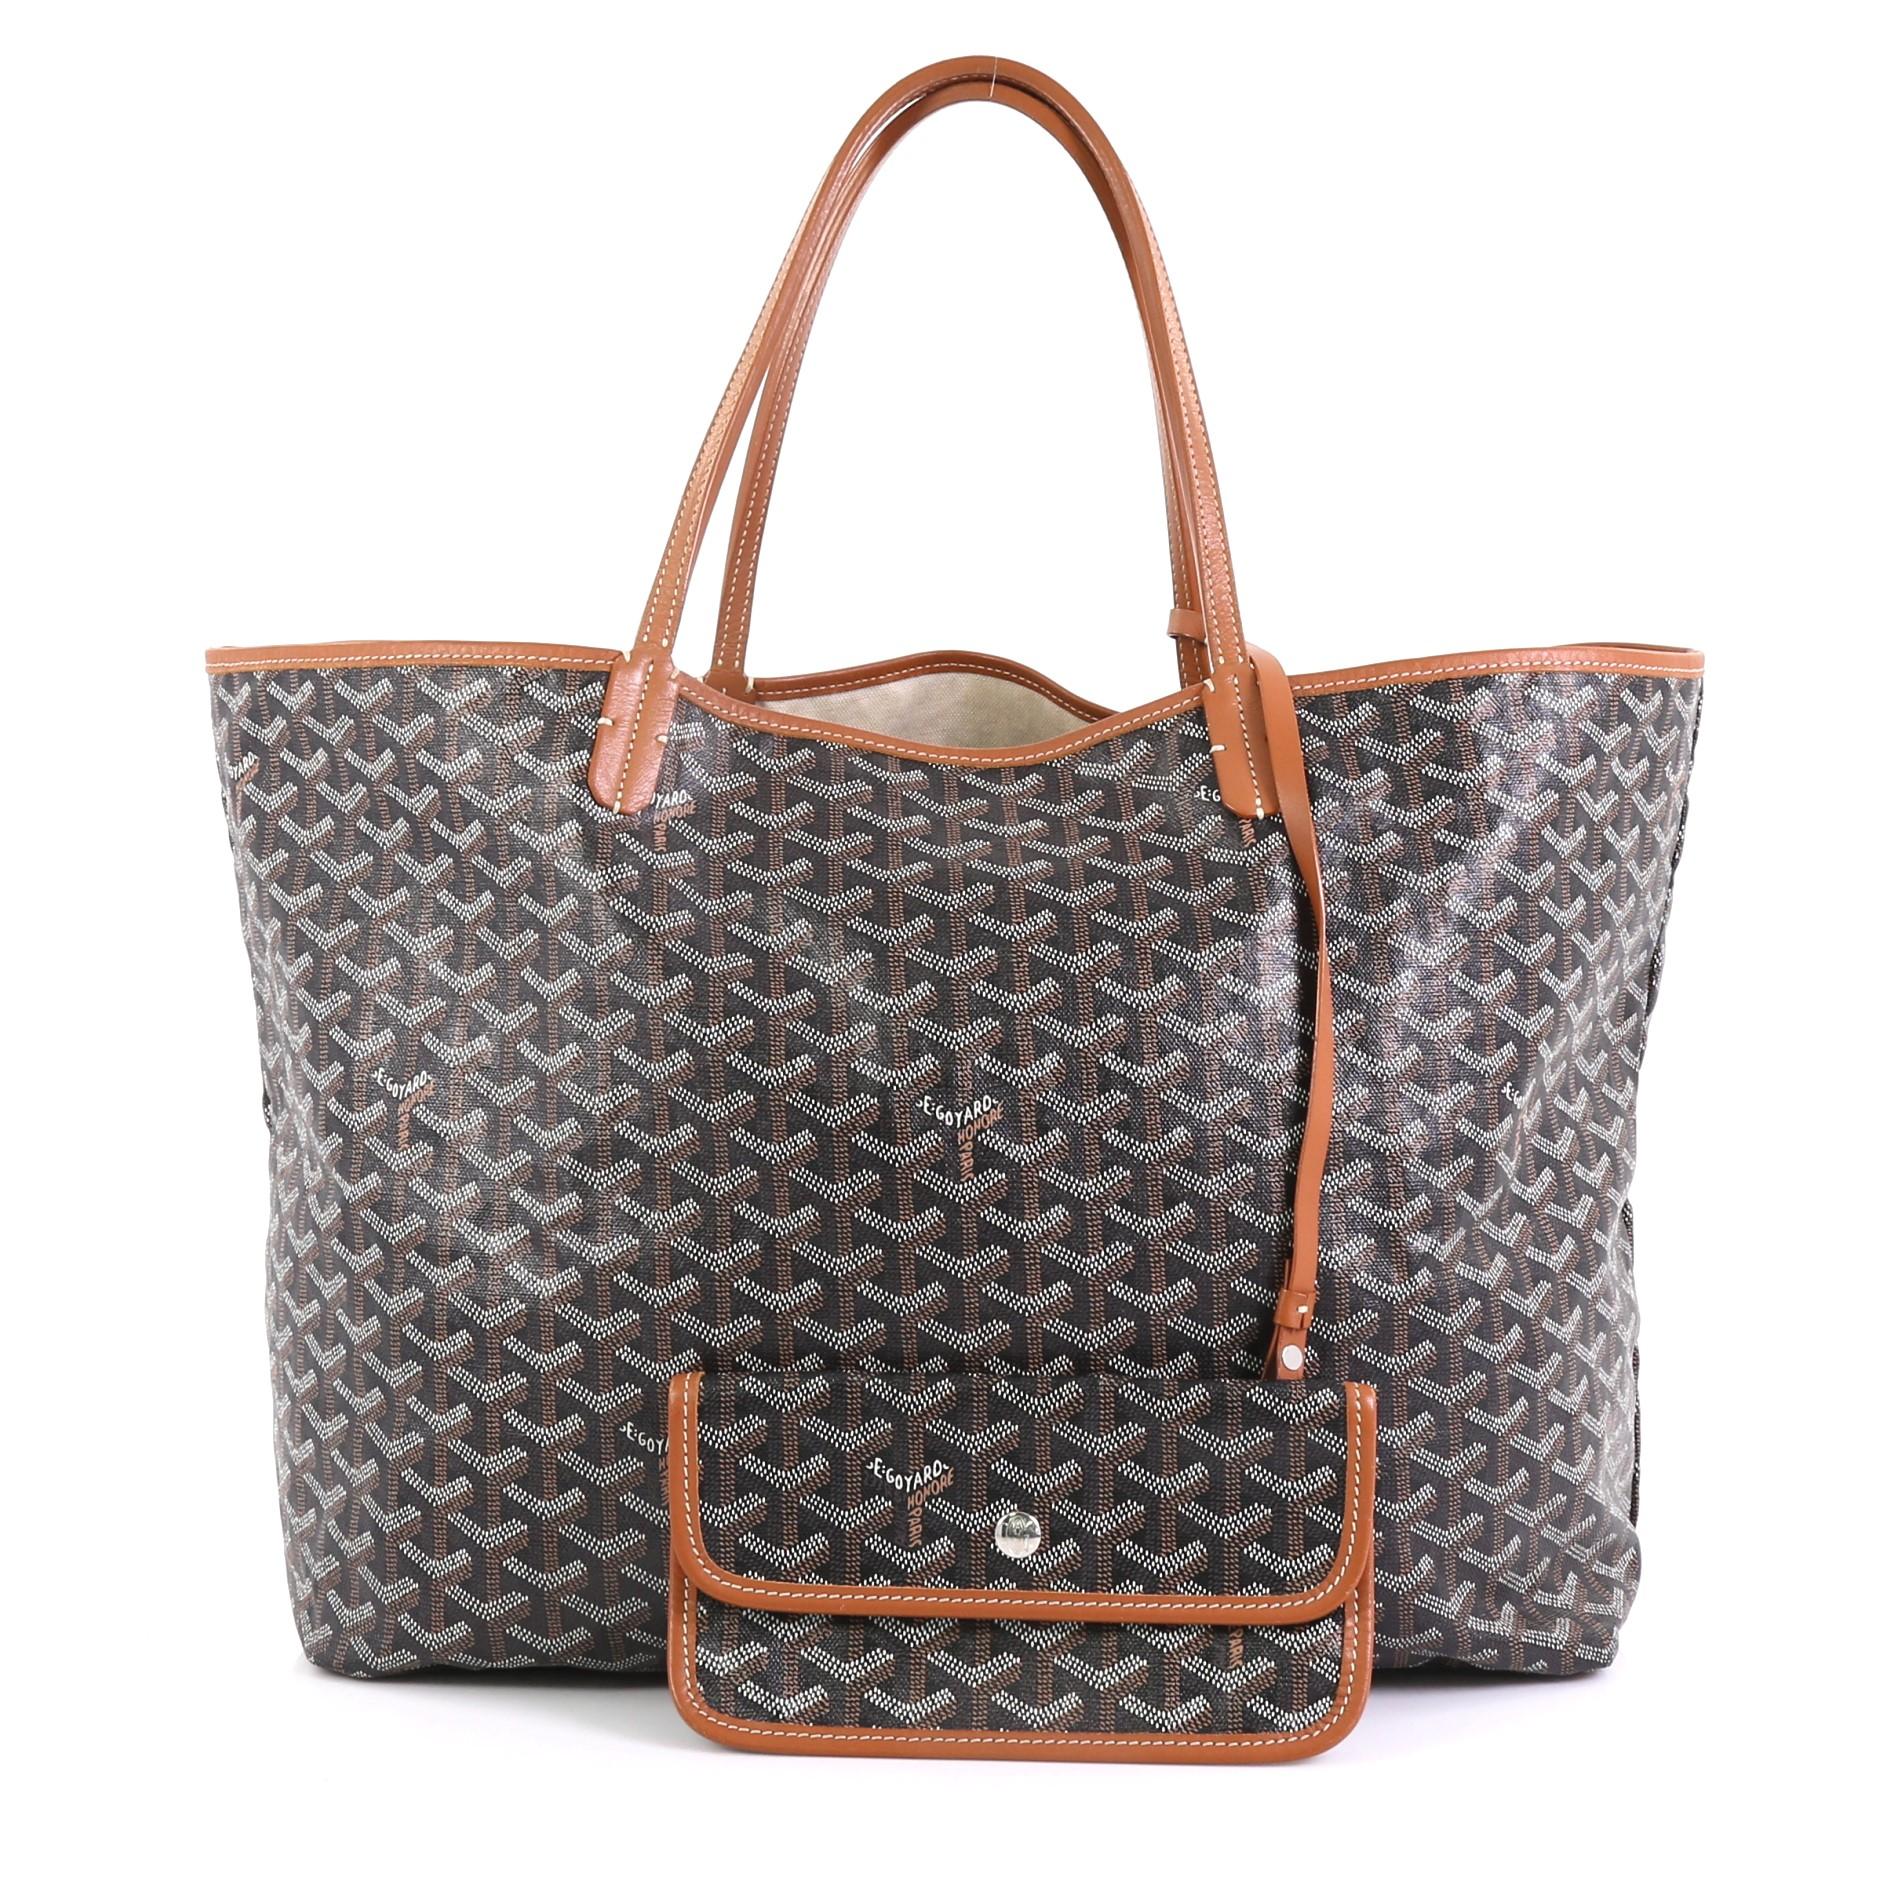 This Goyard St. Louis Tote Coated Canvas GM, crafted in black coated canvas, features flat leather handles and silver-tone hardware. Its wide open top showcases a neutral fabric interior. 

Condition: Good. Small tear on base corner. Minor wear on